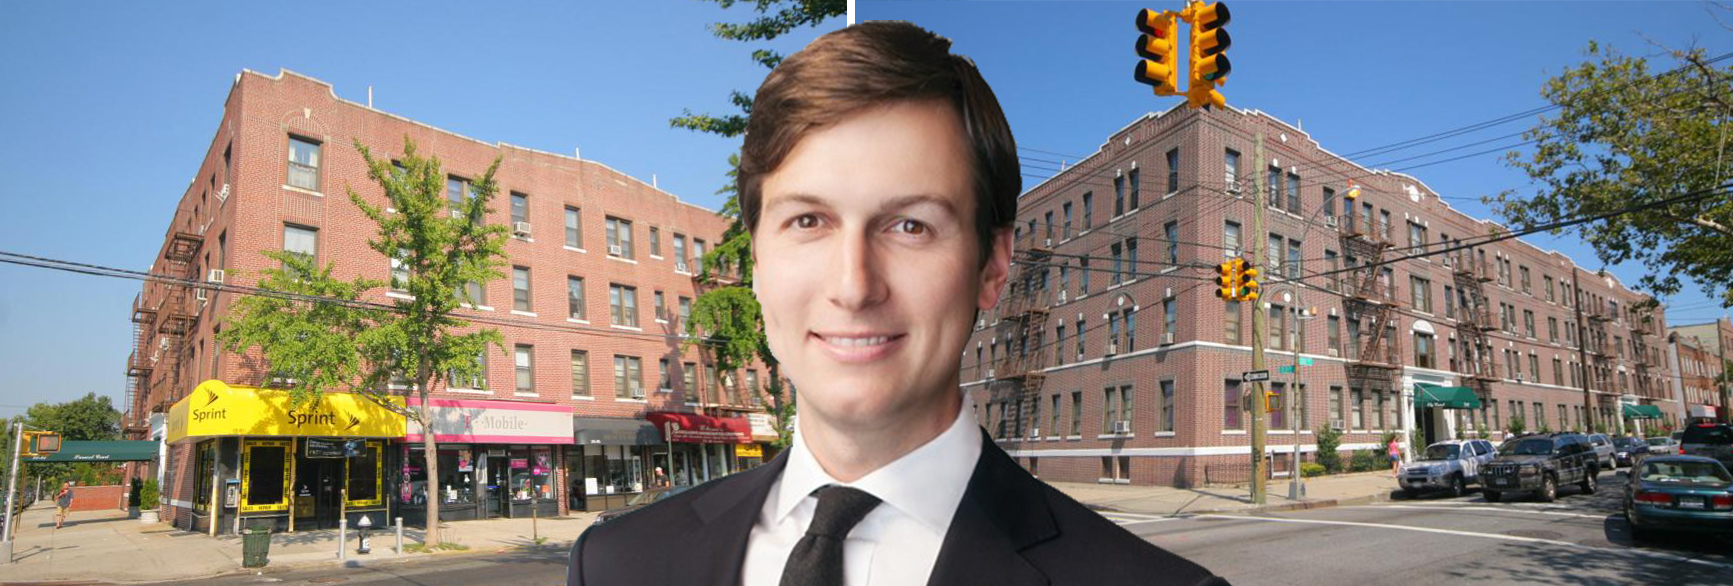 From left: 21-81 38th Street, Jared Kushner and 23-05 30th Avenue in Astoria